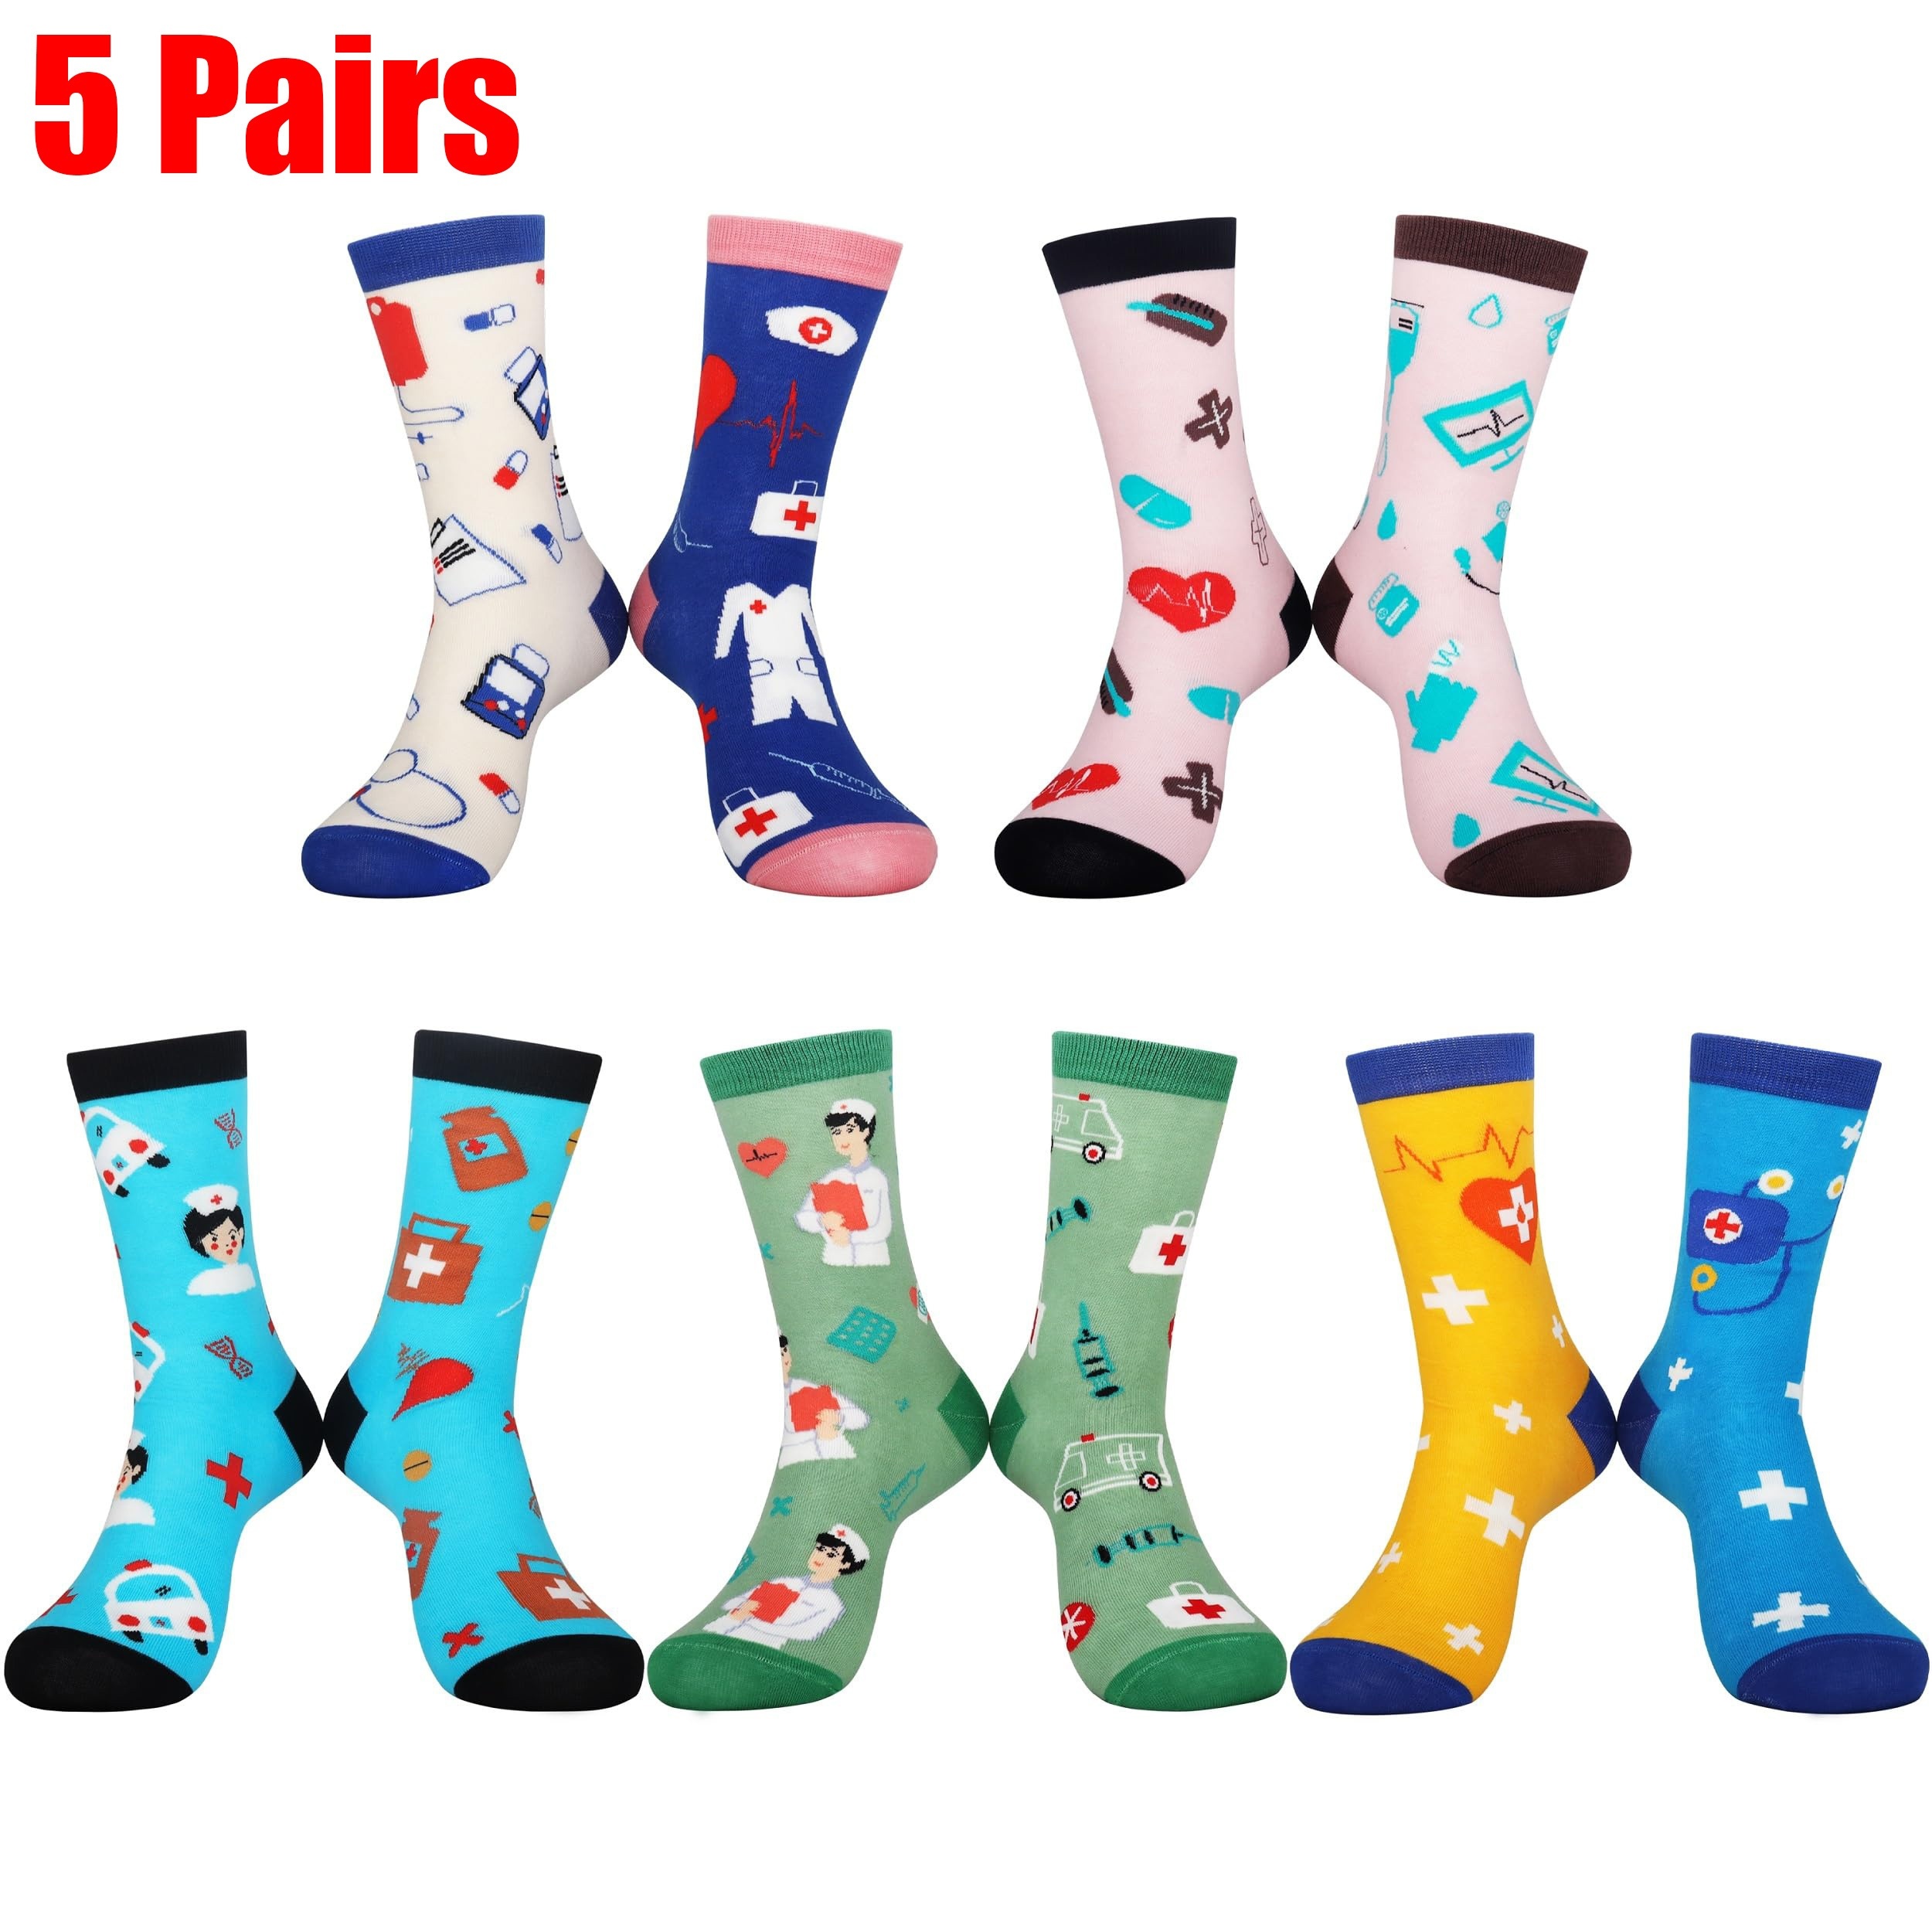 

5 Pairs Nurse-themed Socks For Women, Fun & Quirky Gift For Nurses, Comfortable And Breathable Crew Length With Medical Motifs